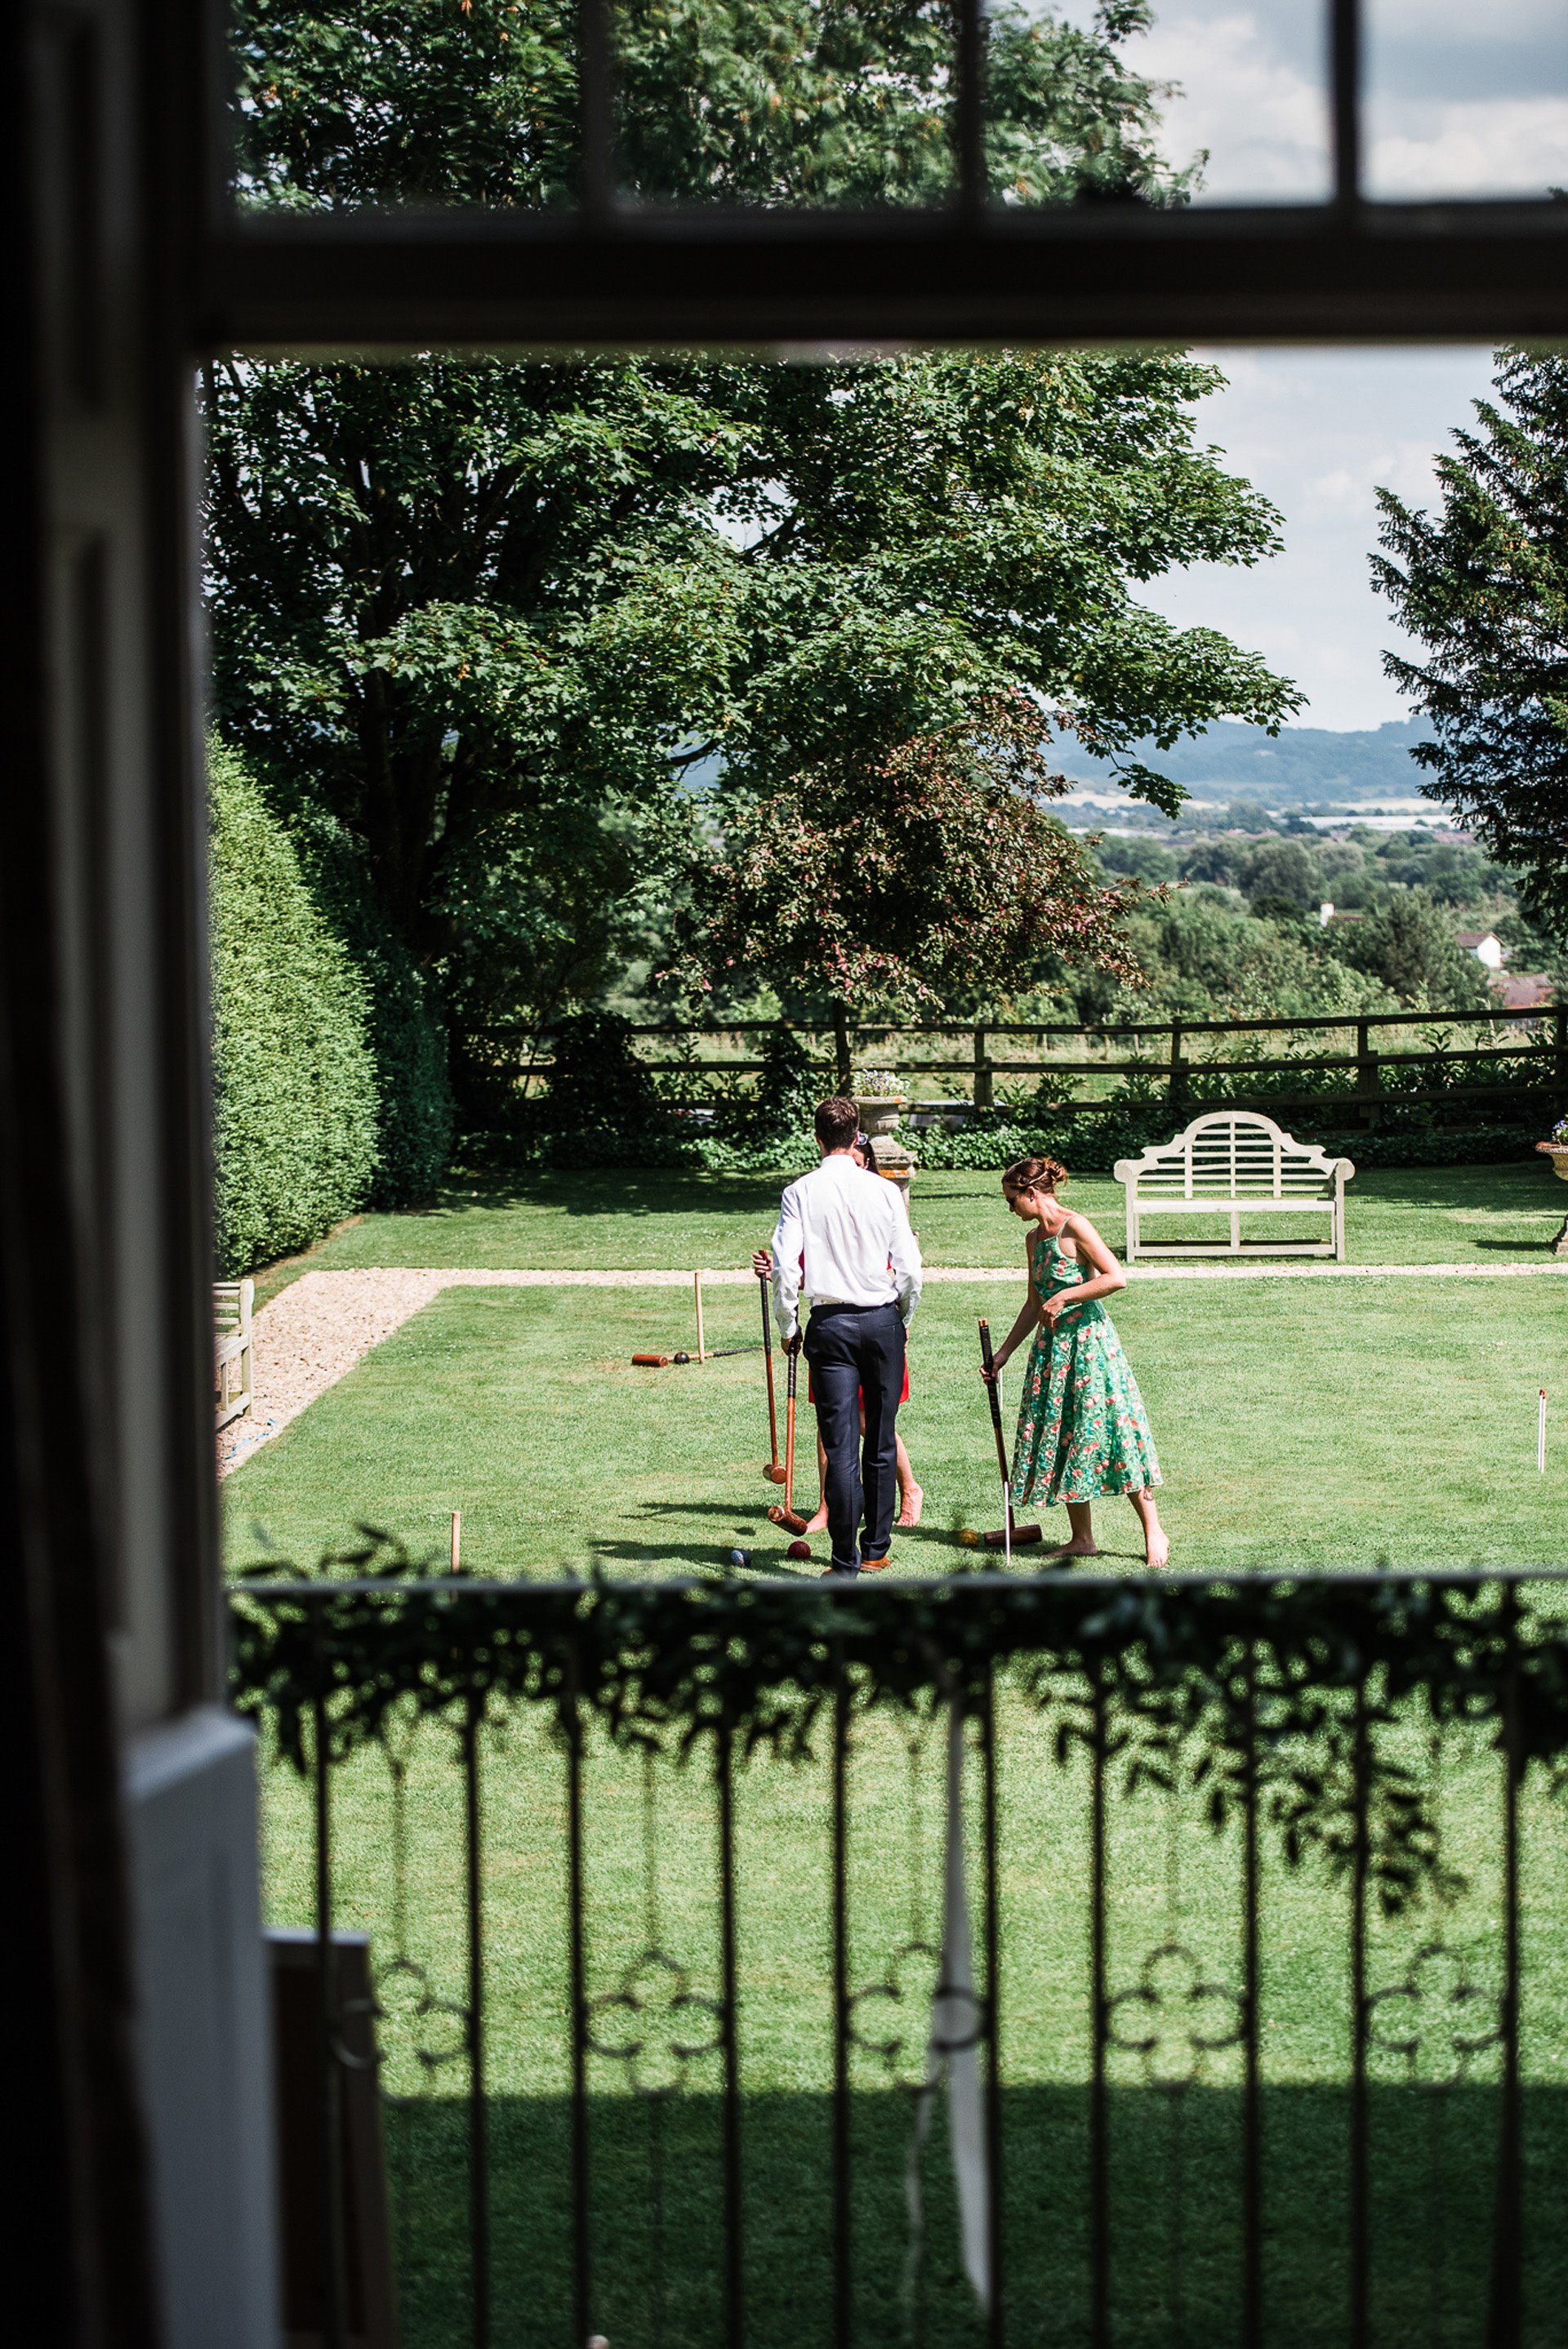 Guests playing Garden games at an outdoor wedding 